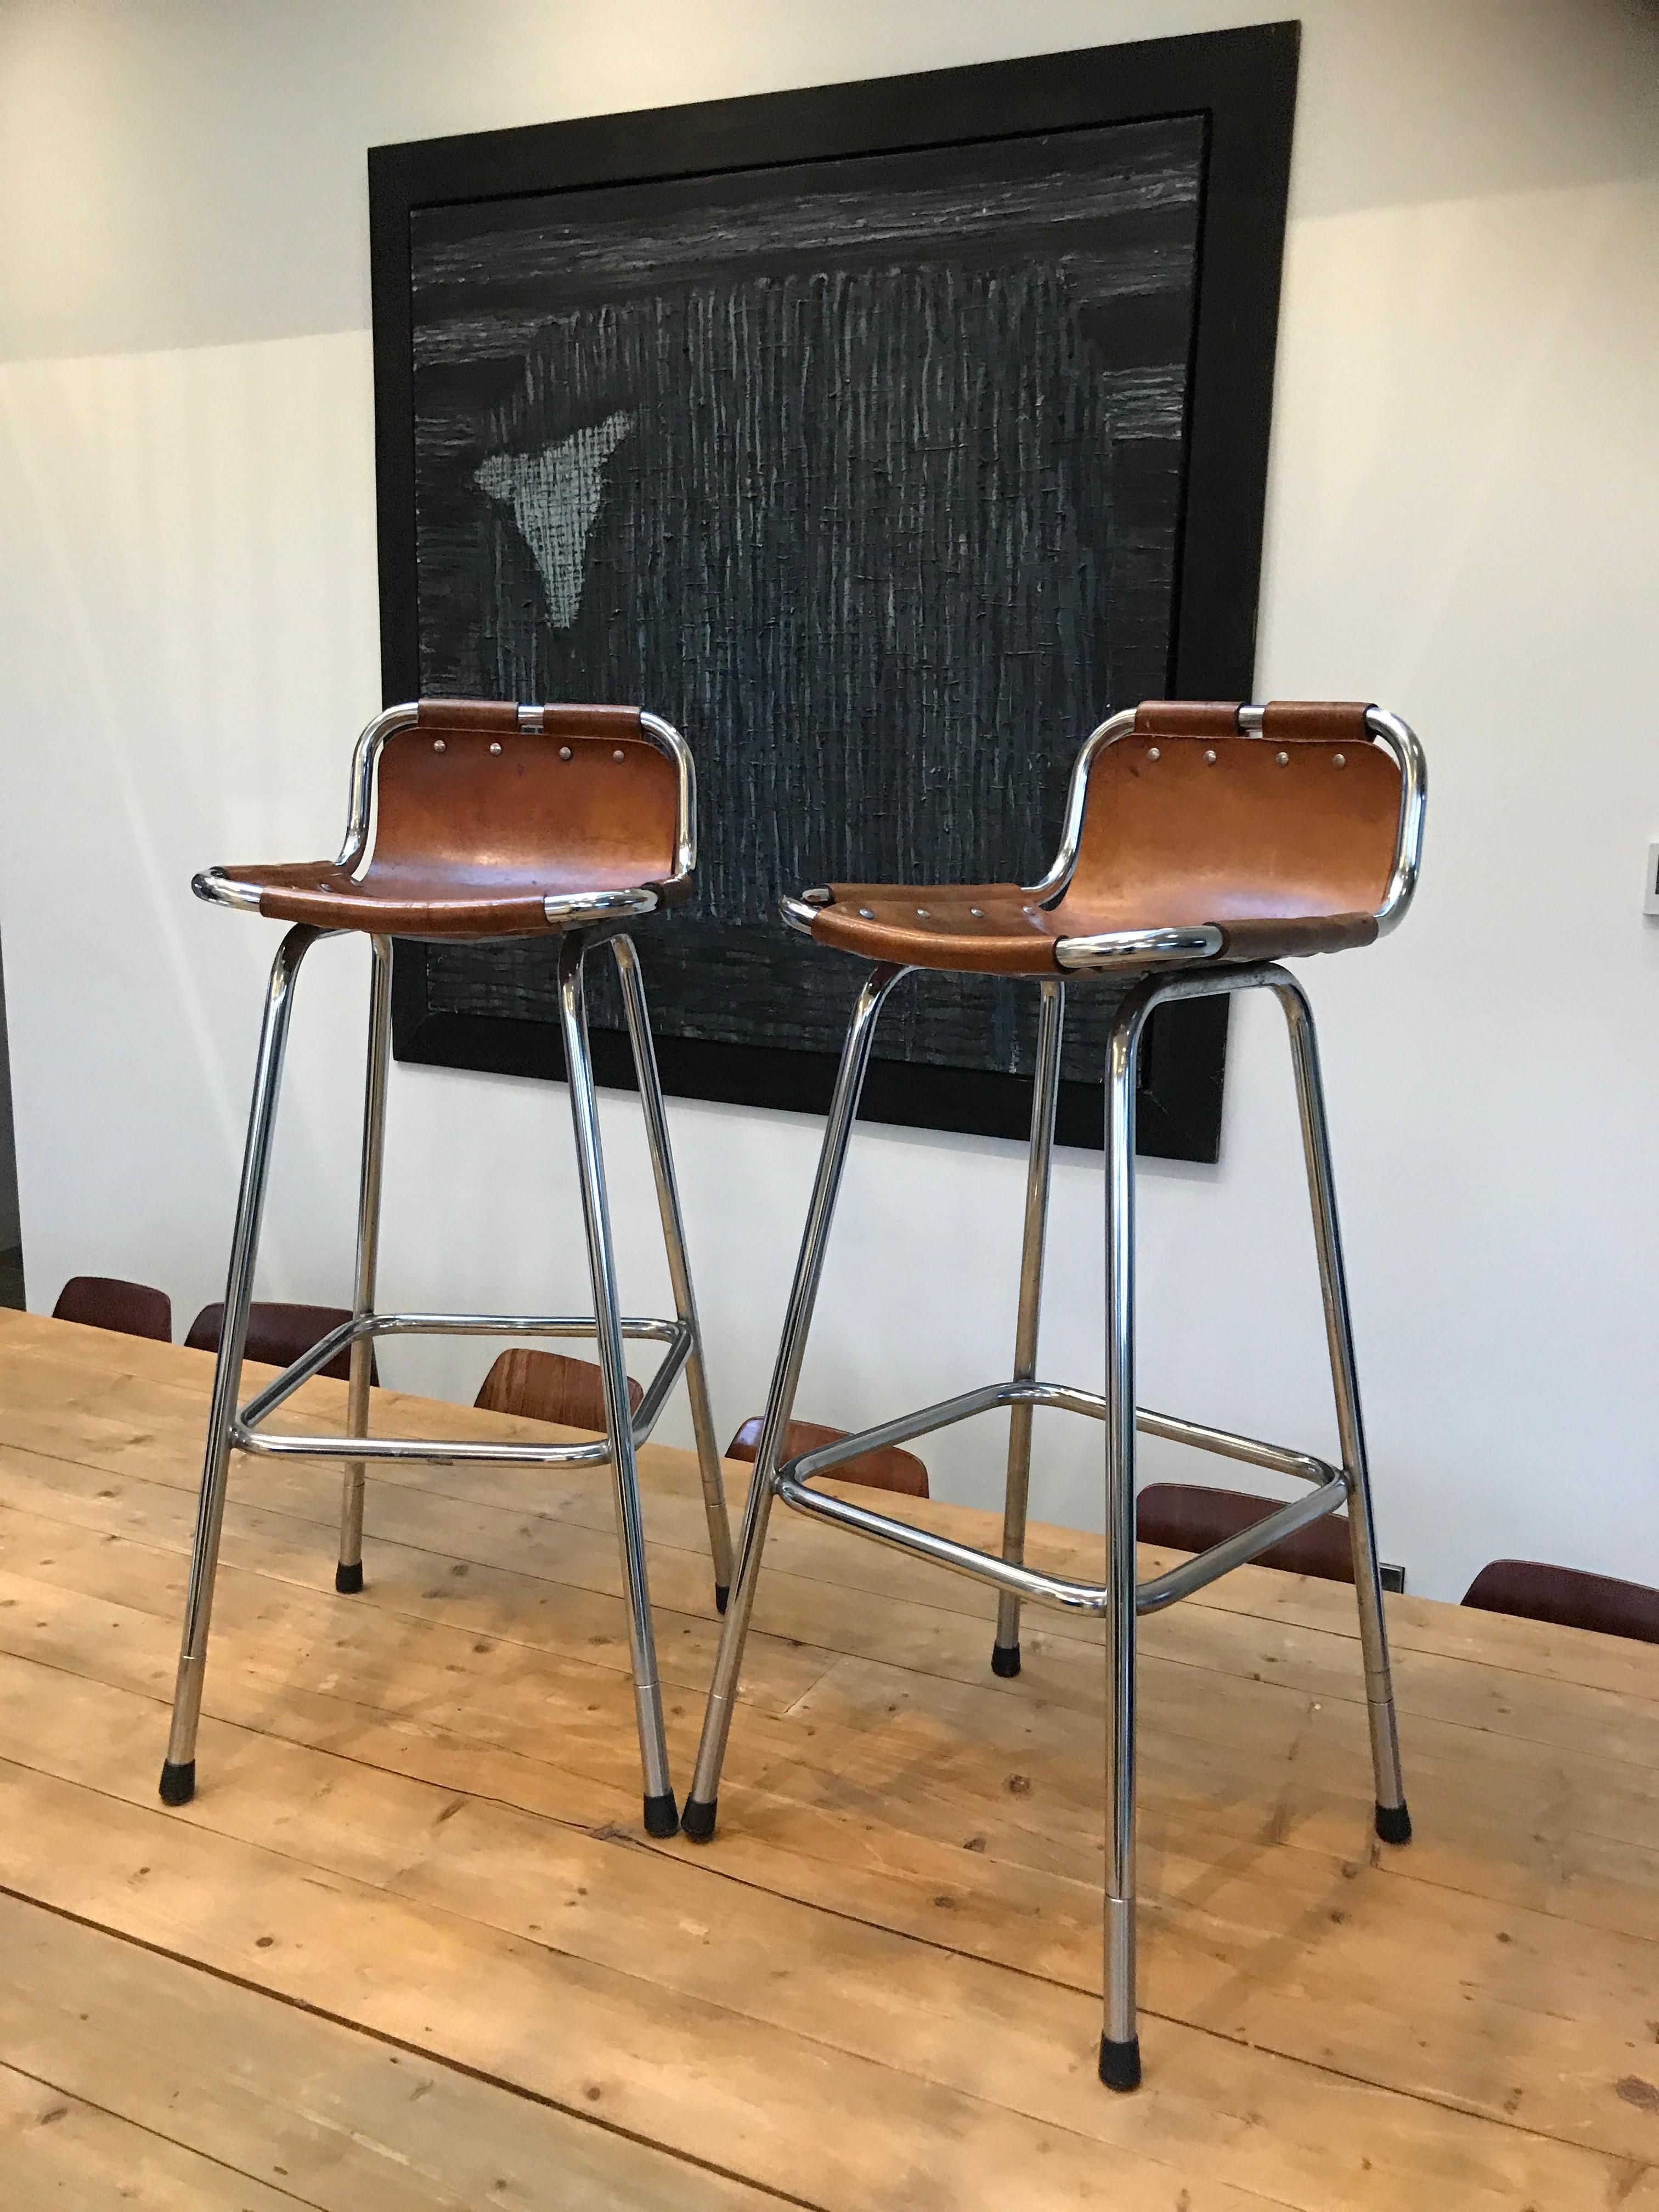 Mid-Century Modern Two High Bar Stools Selected by Charlotte Perriand for the Les Arcs Ski Resort